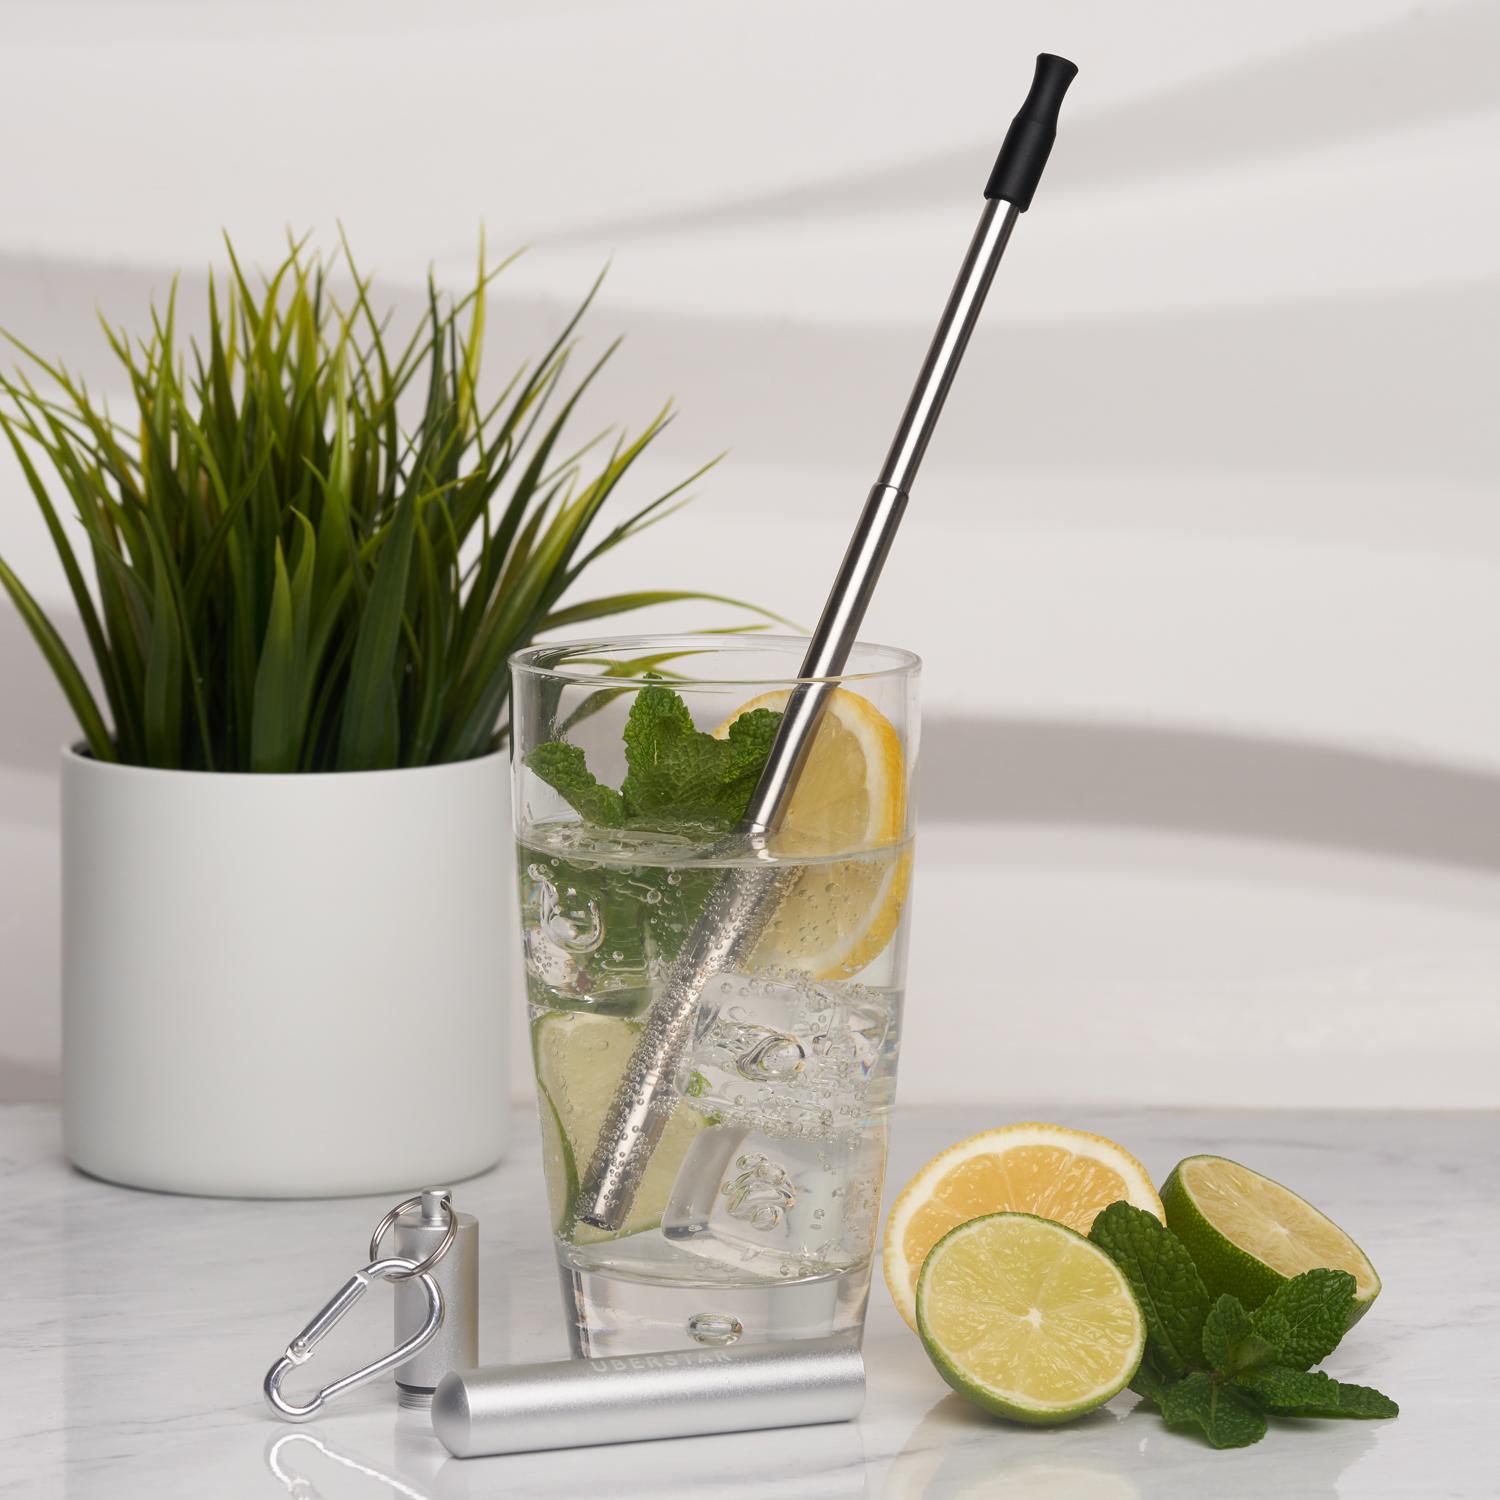 Uberstar Collapsible Travel Stainless Steel Straw - Silver